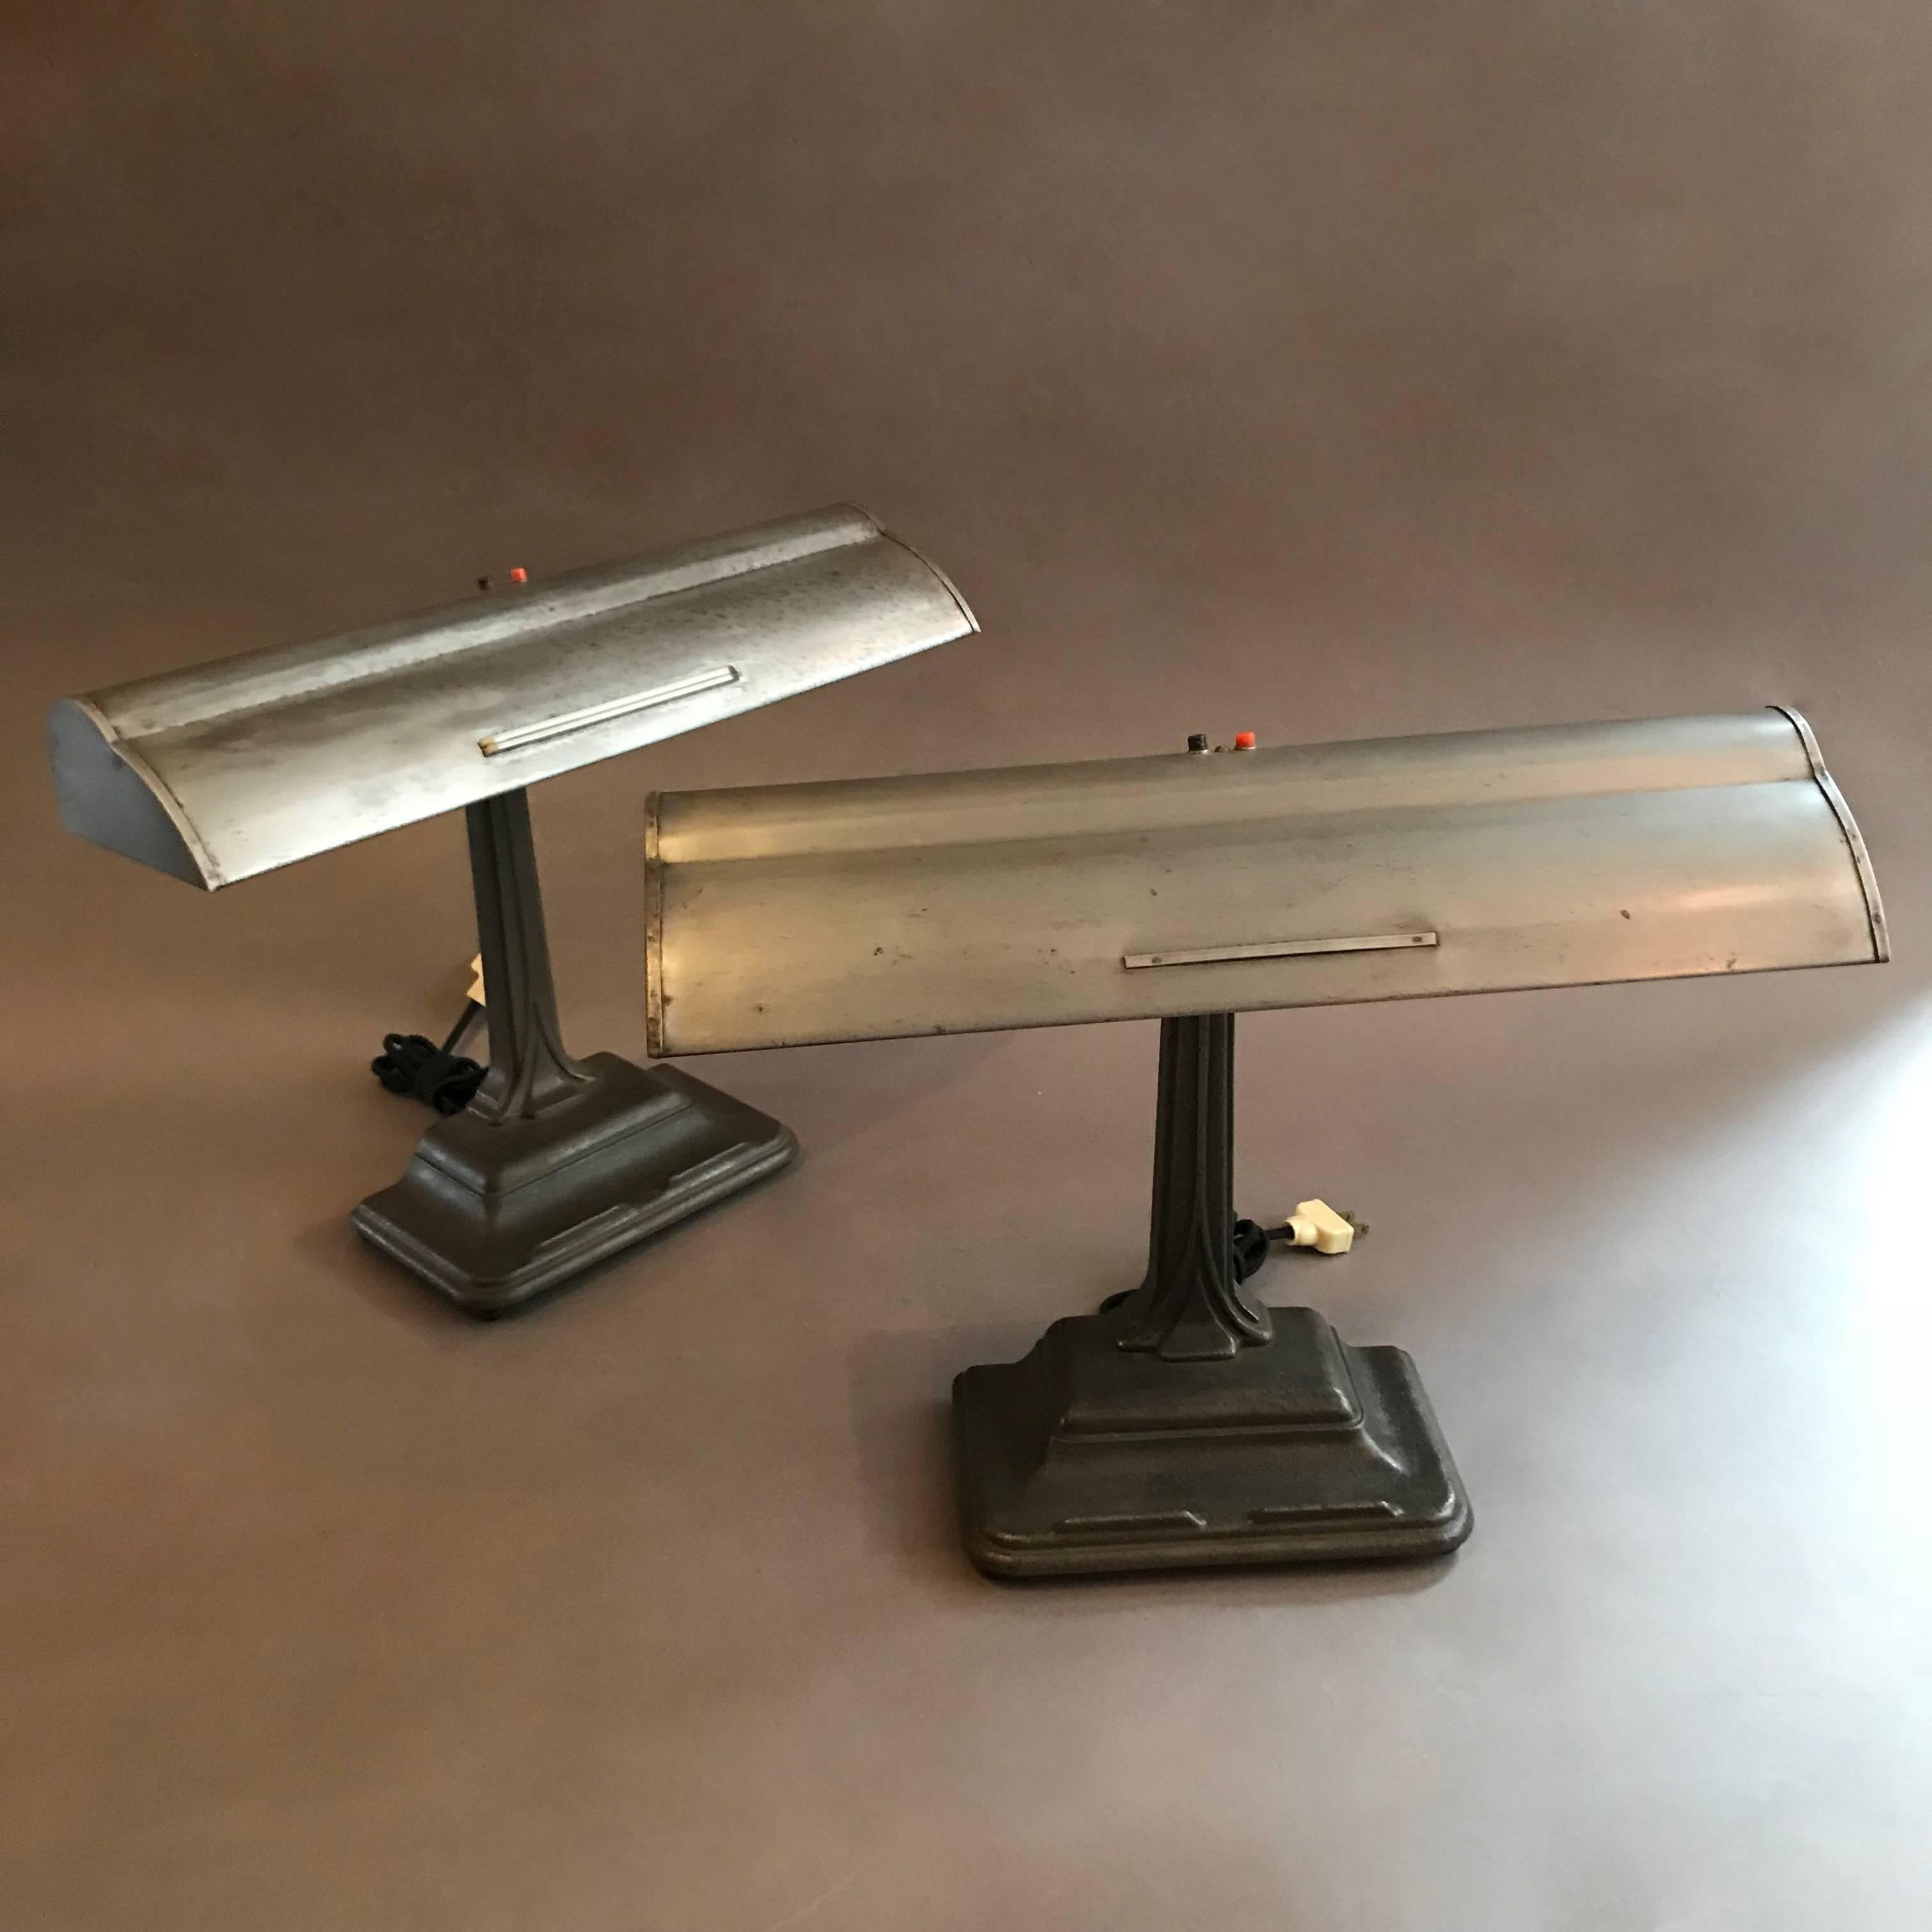 Classic, 1930s, banker's desk lamp features a cast iron base and neck with brushed steel shade. The lamps each have a porcelain medium socket that accepts two bulbs. Two available. Base measures: 9in. W x 6in. D. Please note that the metal grid